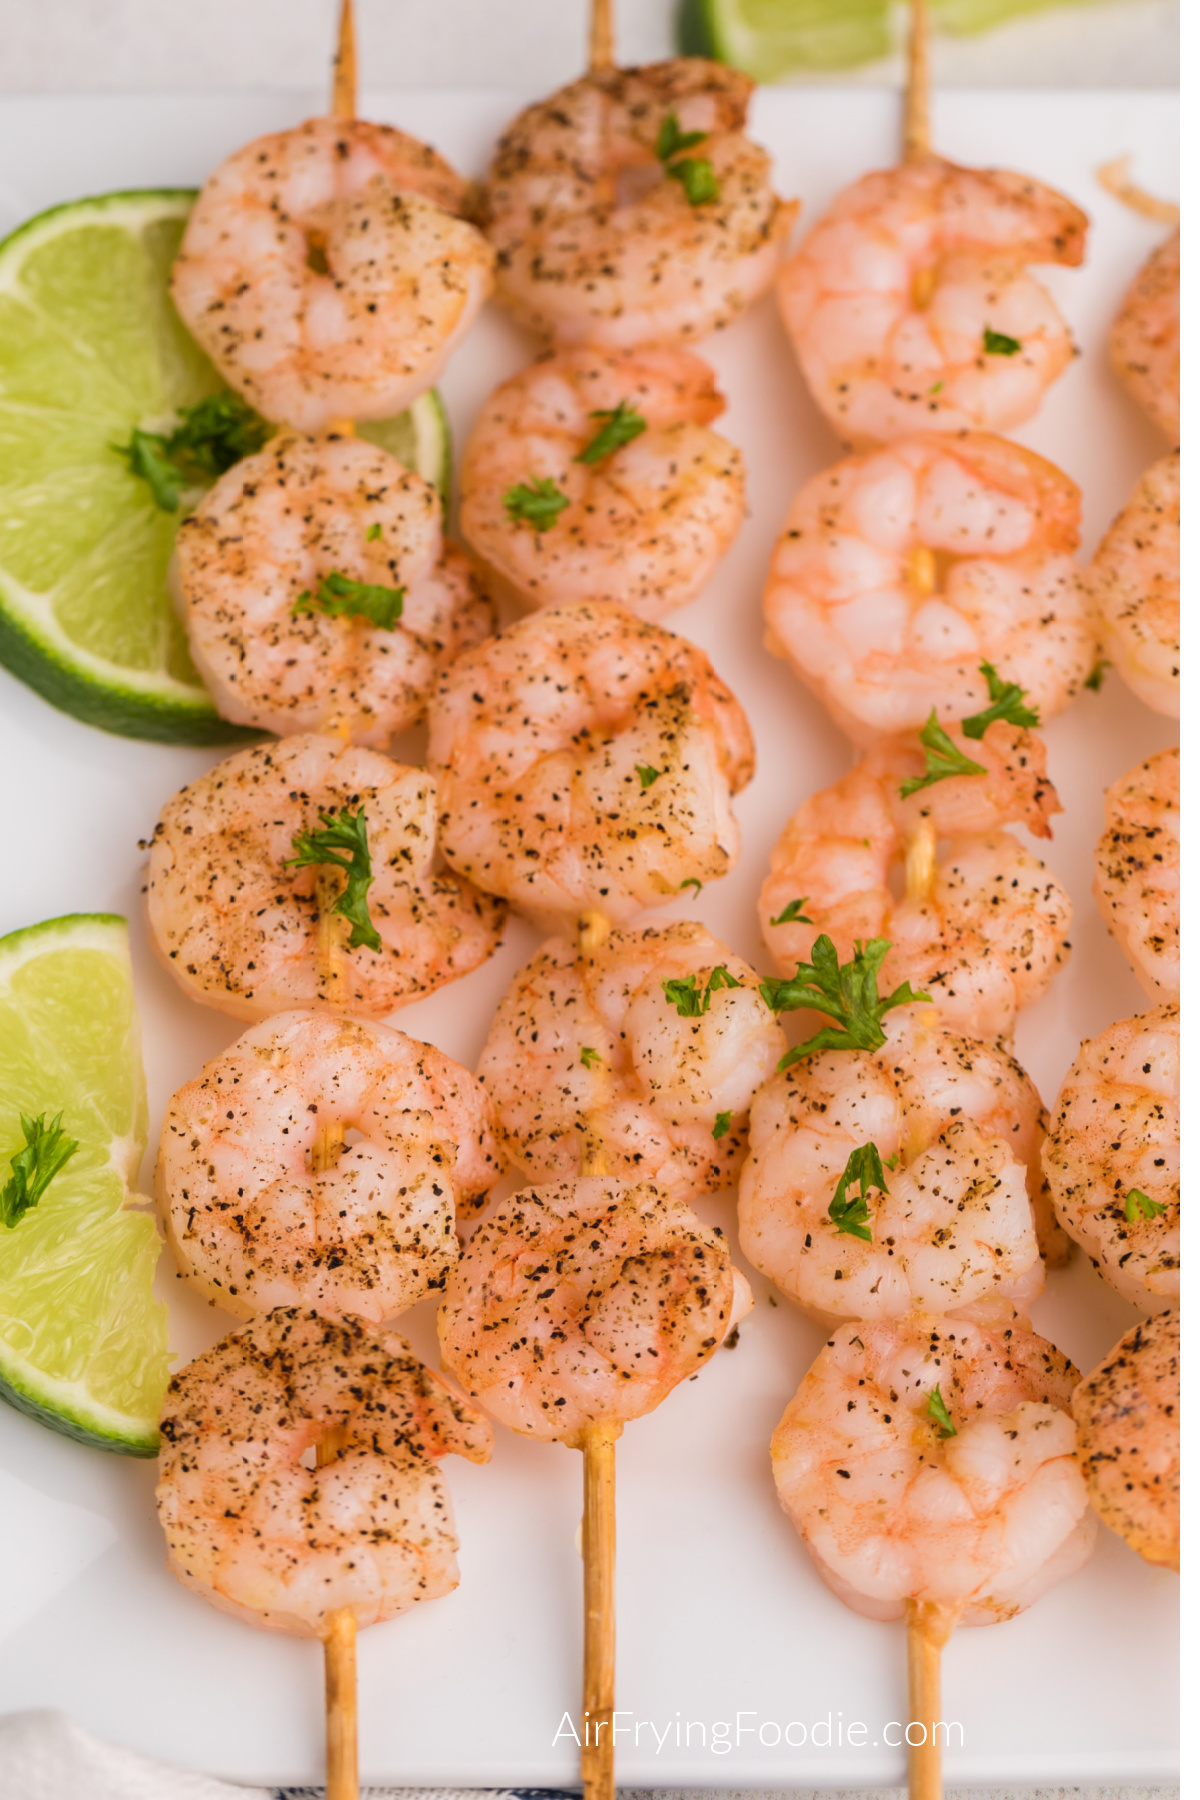 Shrimp skewers made in the air fryer and served on a white plate.